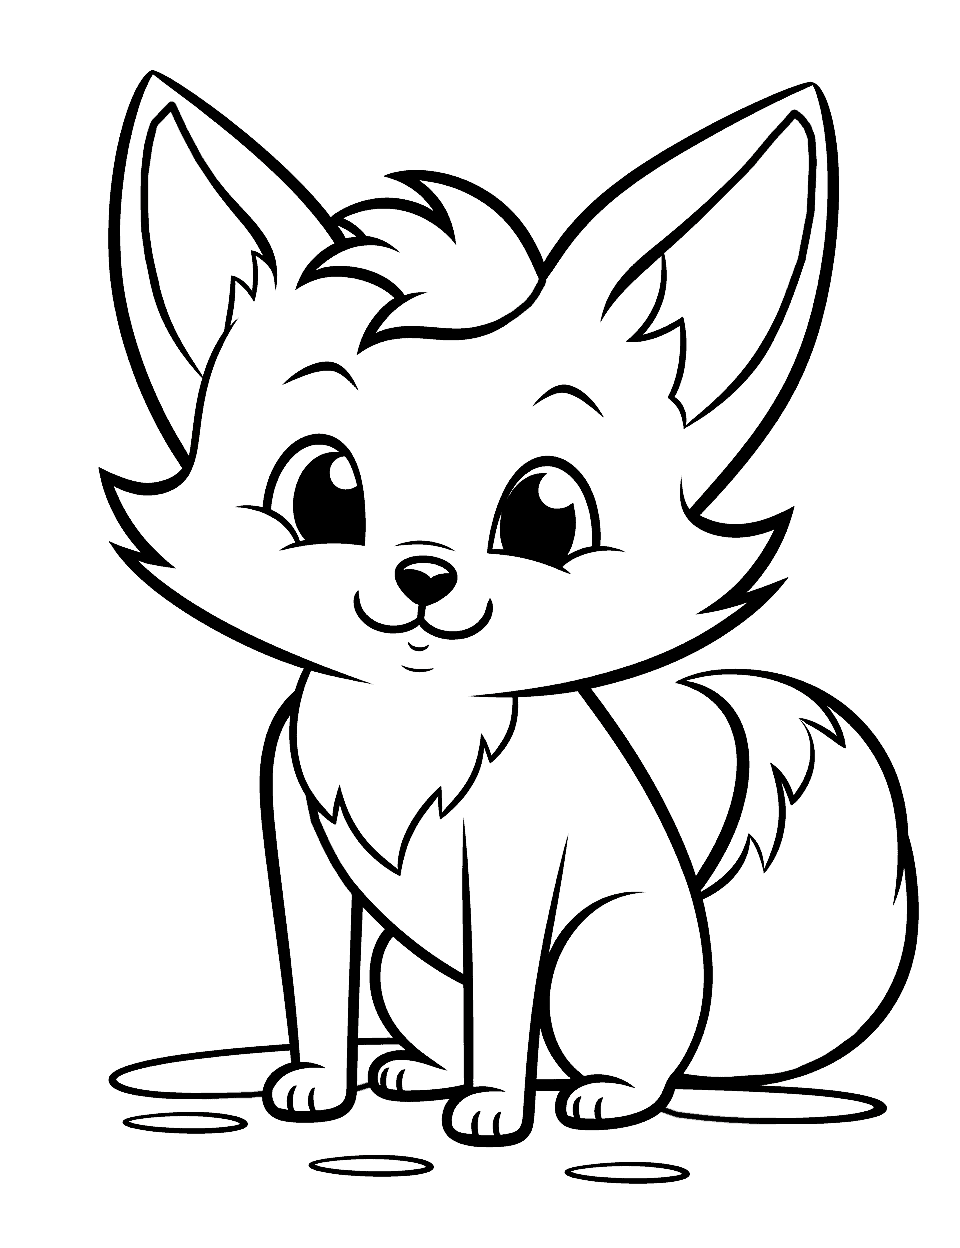 Chibi Fox Cuteness Coloring Page - An irresistibly cute, small-bodied fox with exaggerated features.